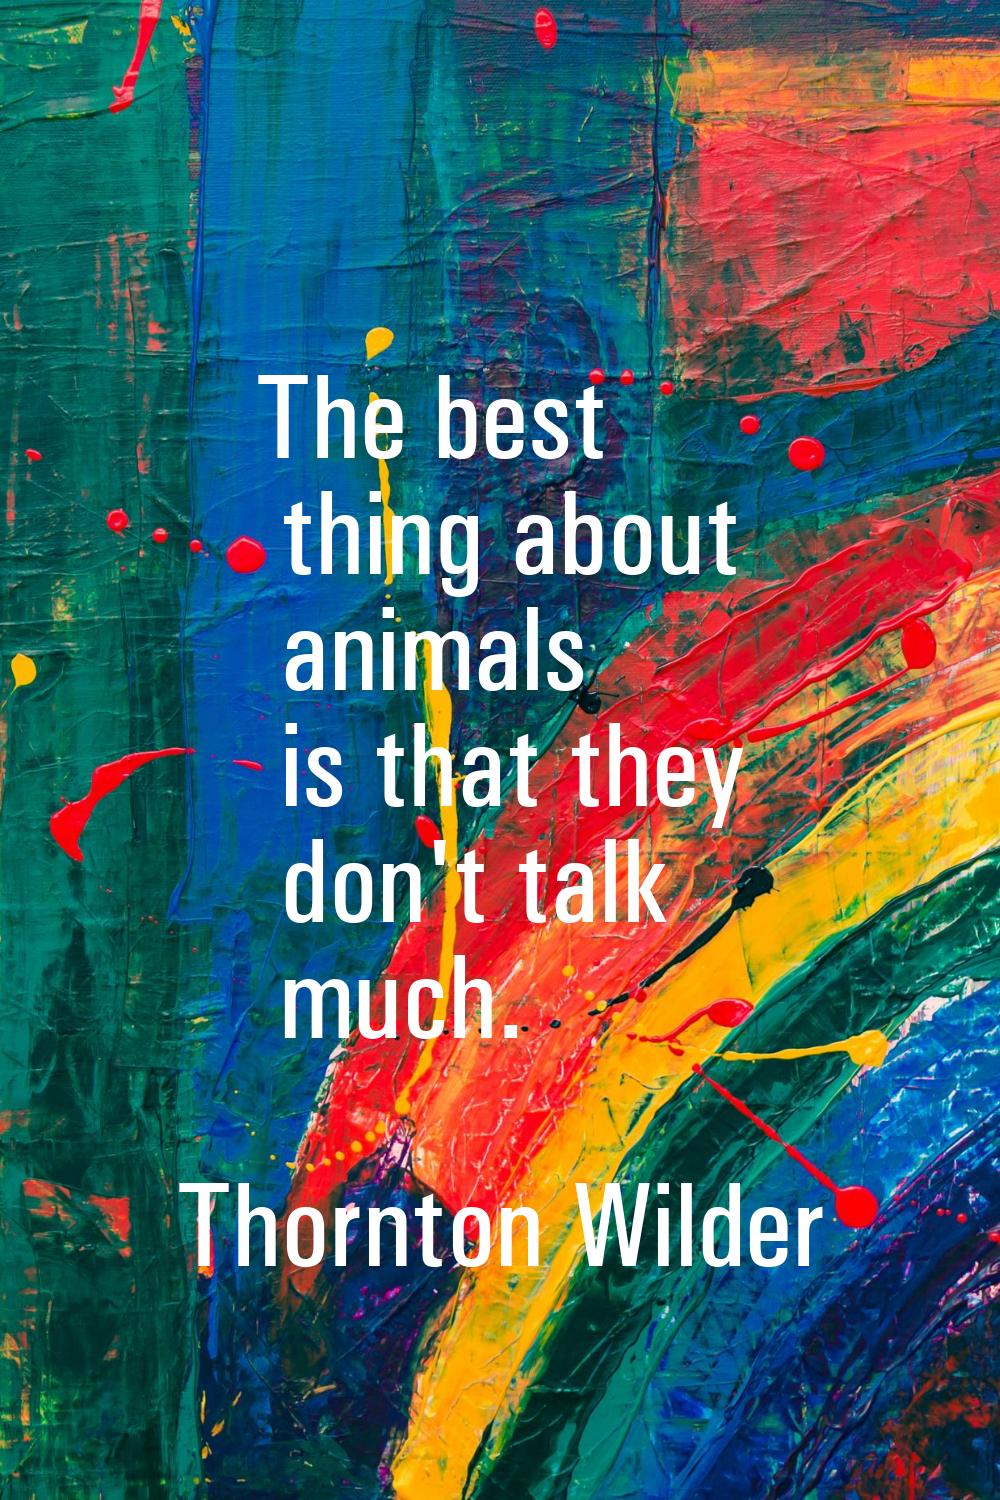 The best thing about animals is that they don't talk much.